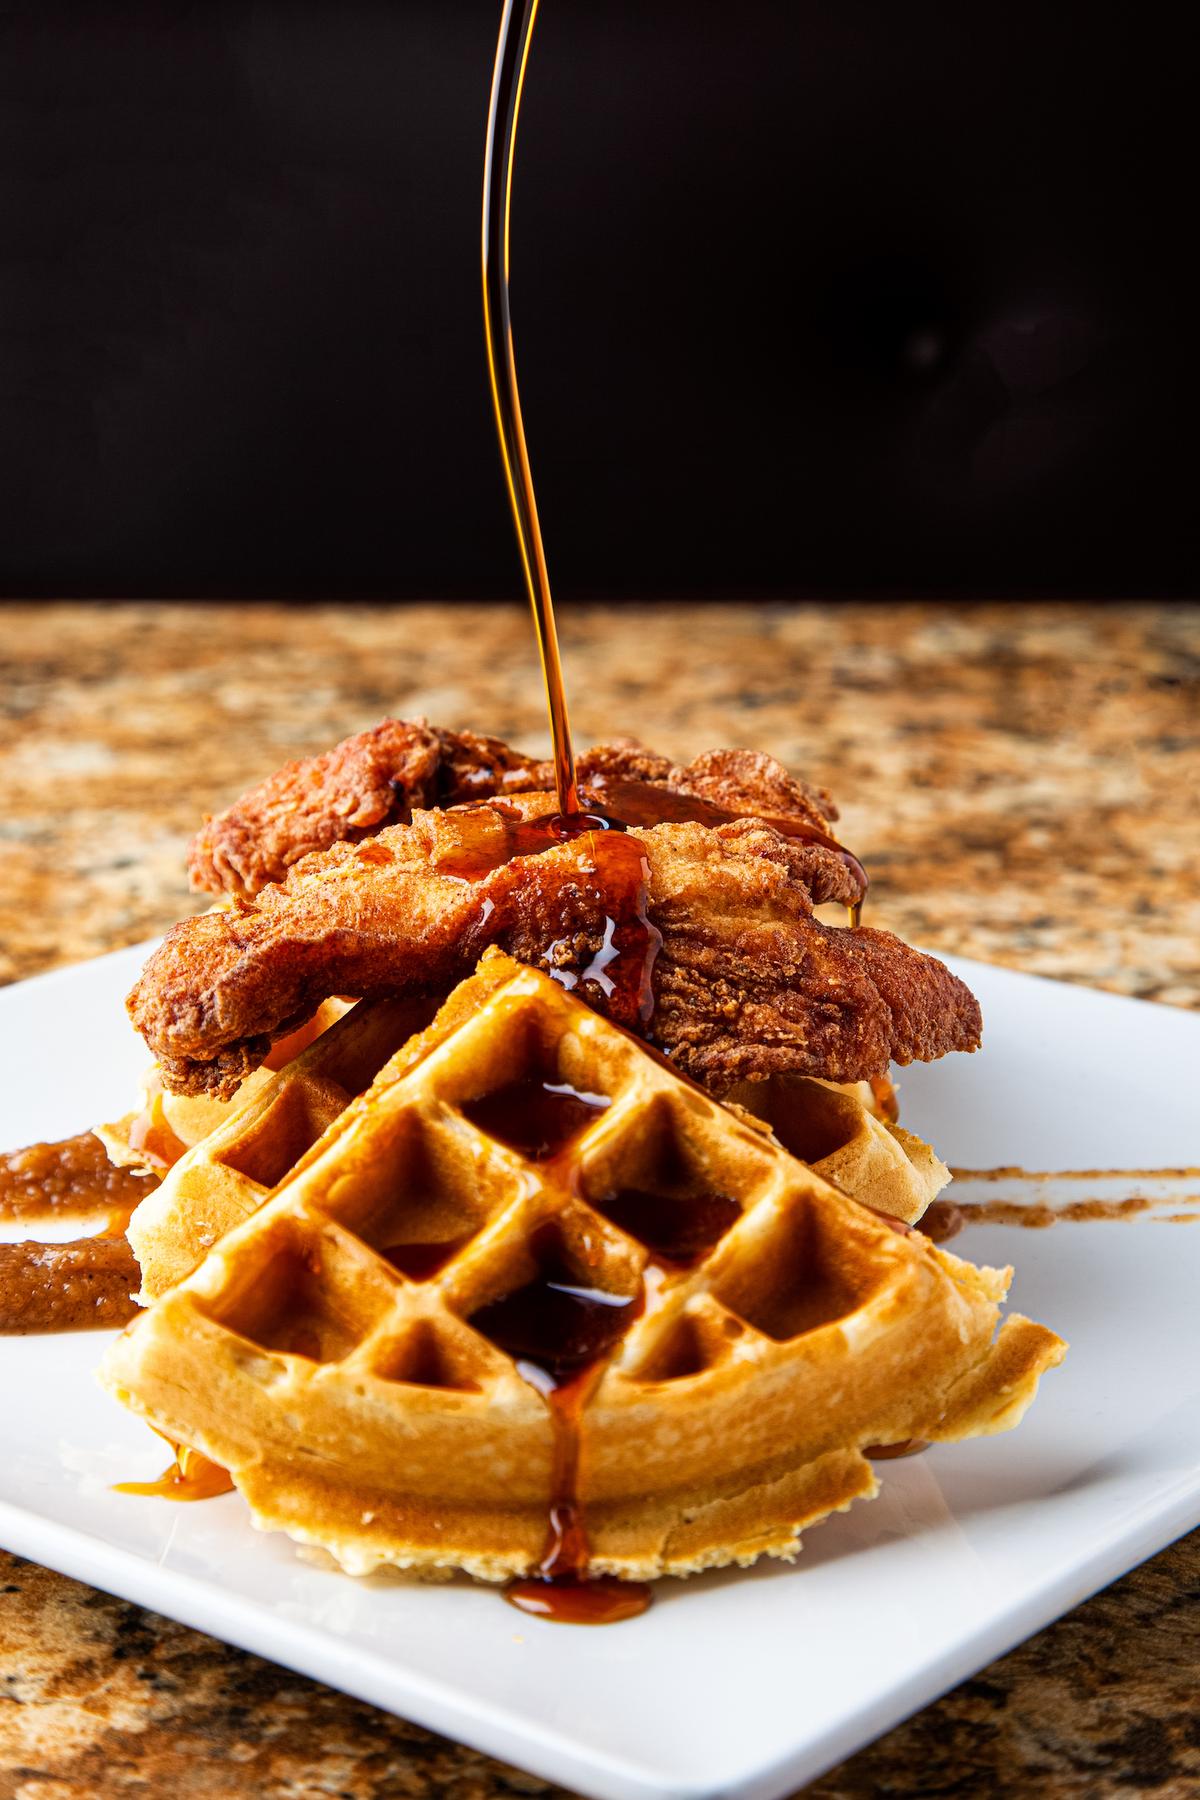 Chicken and waffles, served with rosemary-infused maple syrup and housemade apple butter. (Mark Manne Photography)